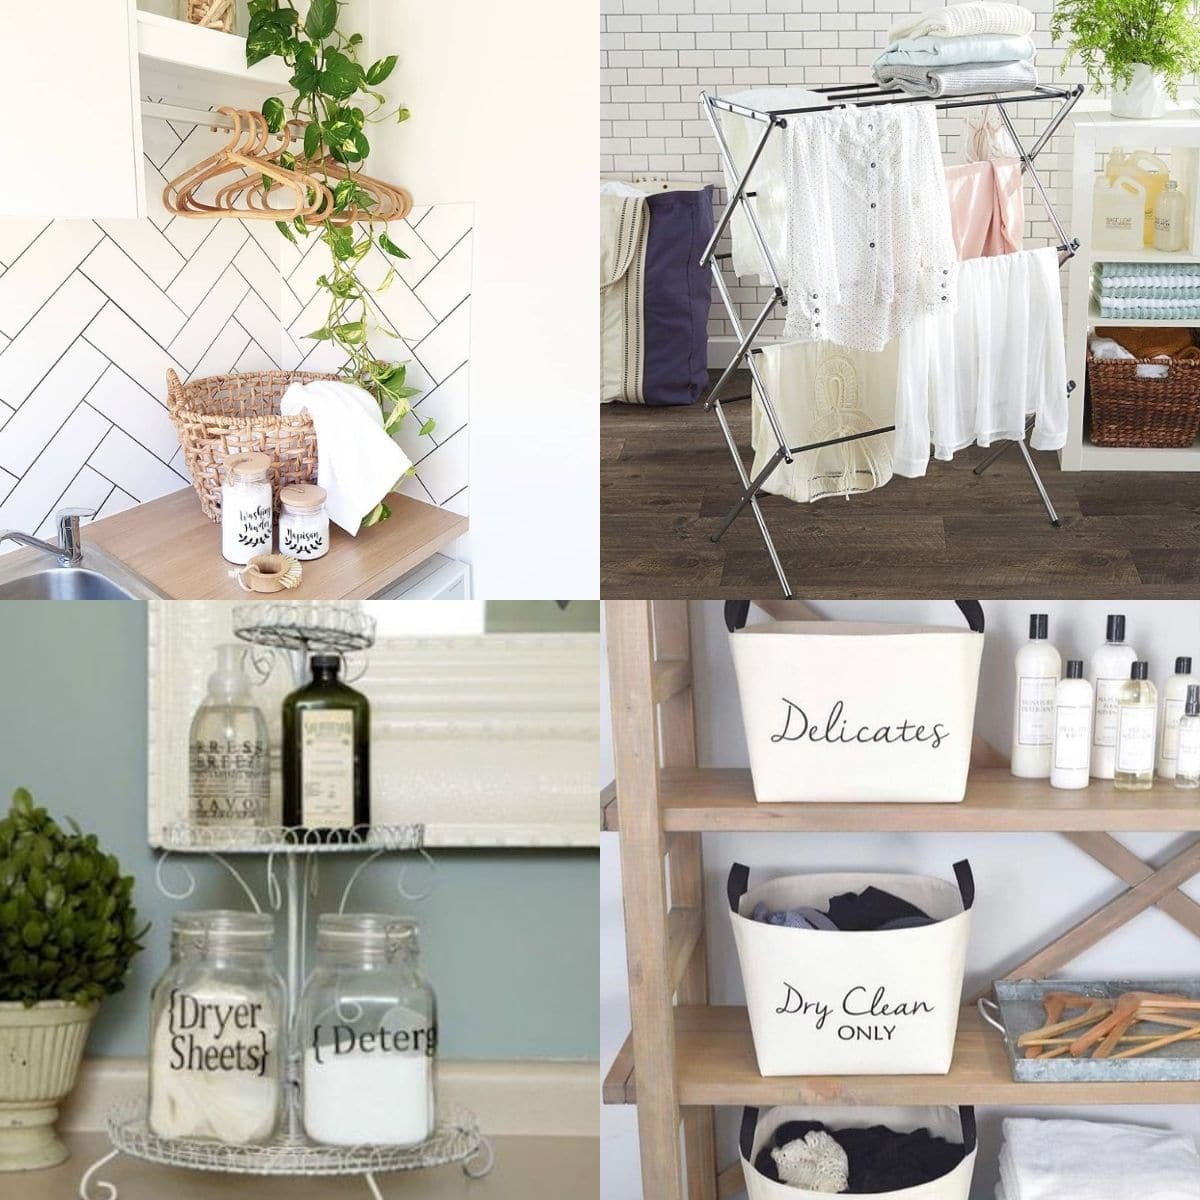 Laundry room can get messy!

Use these storage hacks to keep your laundry room neat and beautiful. 😉

#Storage #StorageIdeas #LaundryRoomStorage #LaundryRoomStorageIdeas

 LocalInfoForYou.com/77723/laundry-…